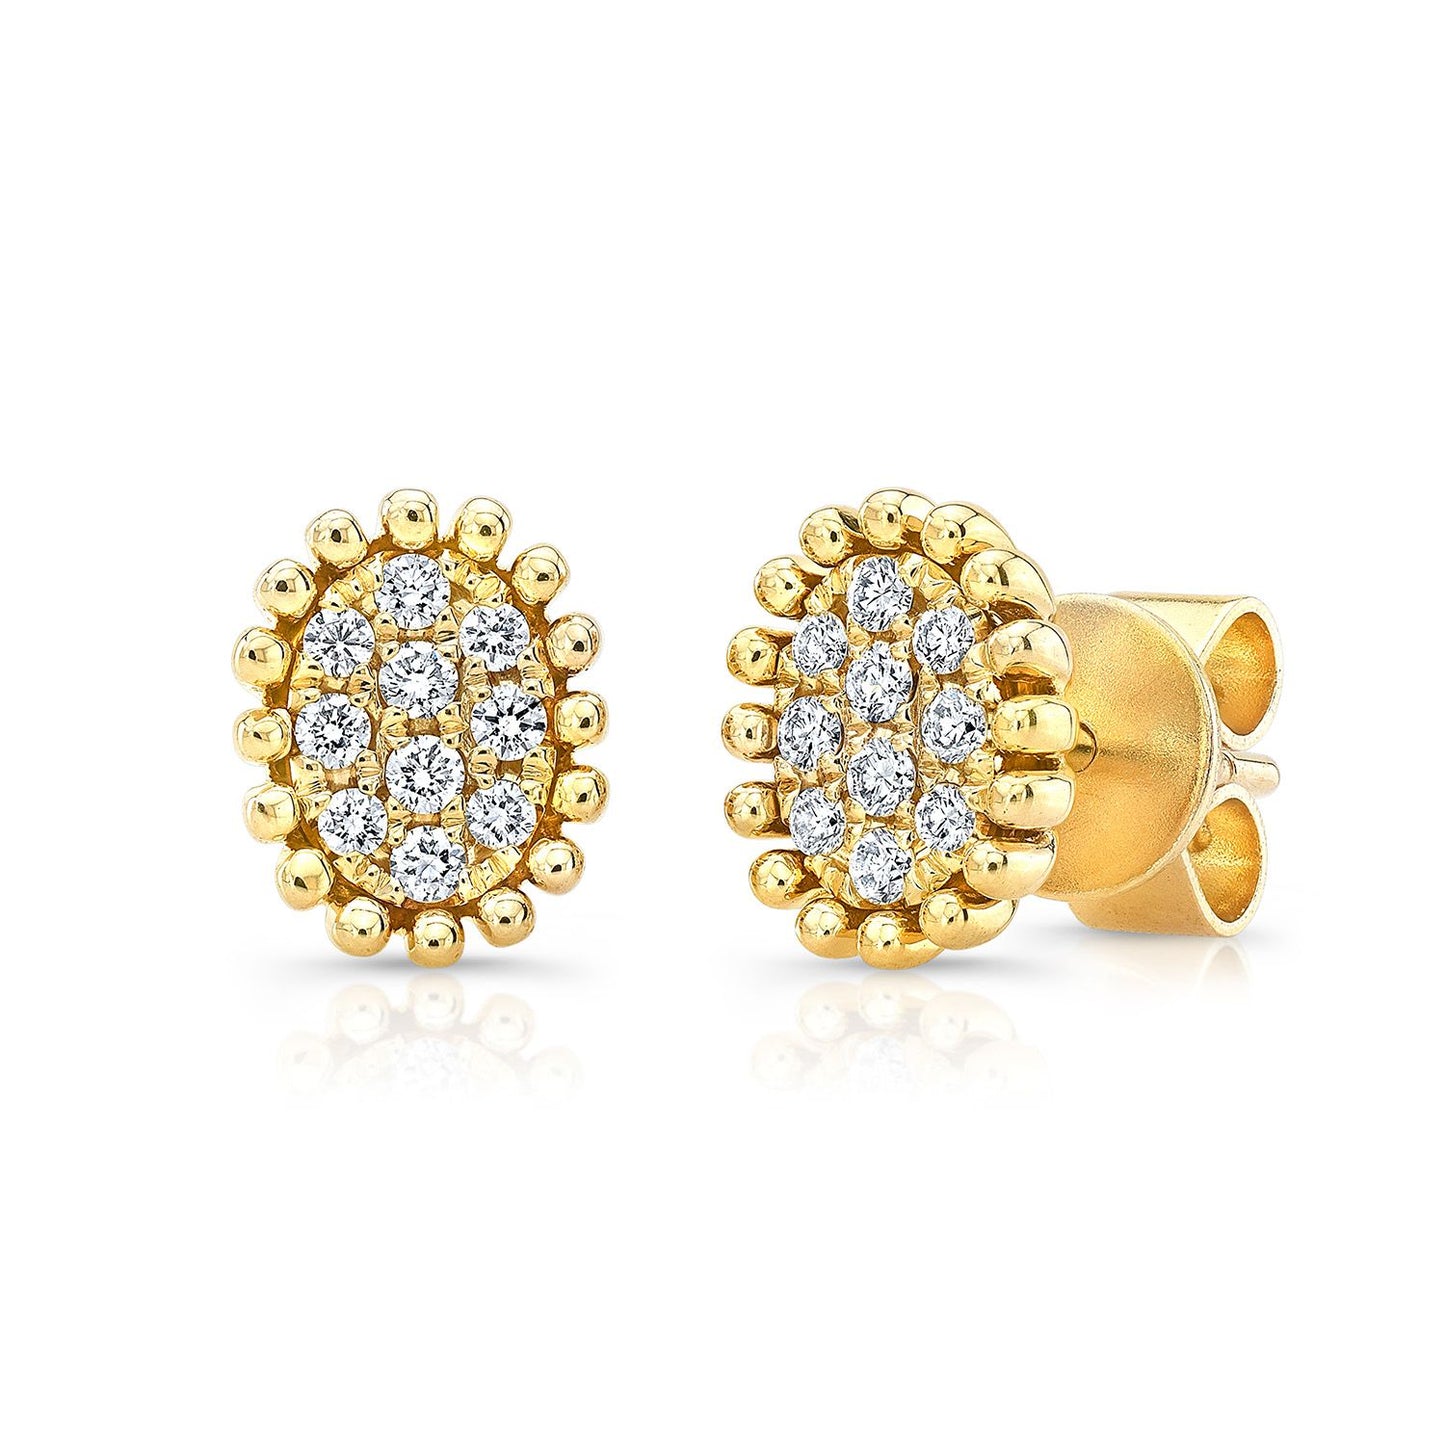 Diamond Pave Oval-shape Earrings With Beaded Border In 14k Yellow Gold